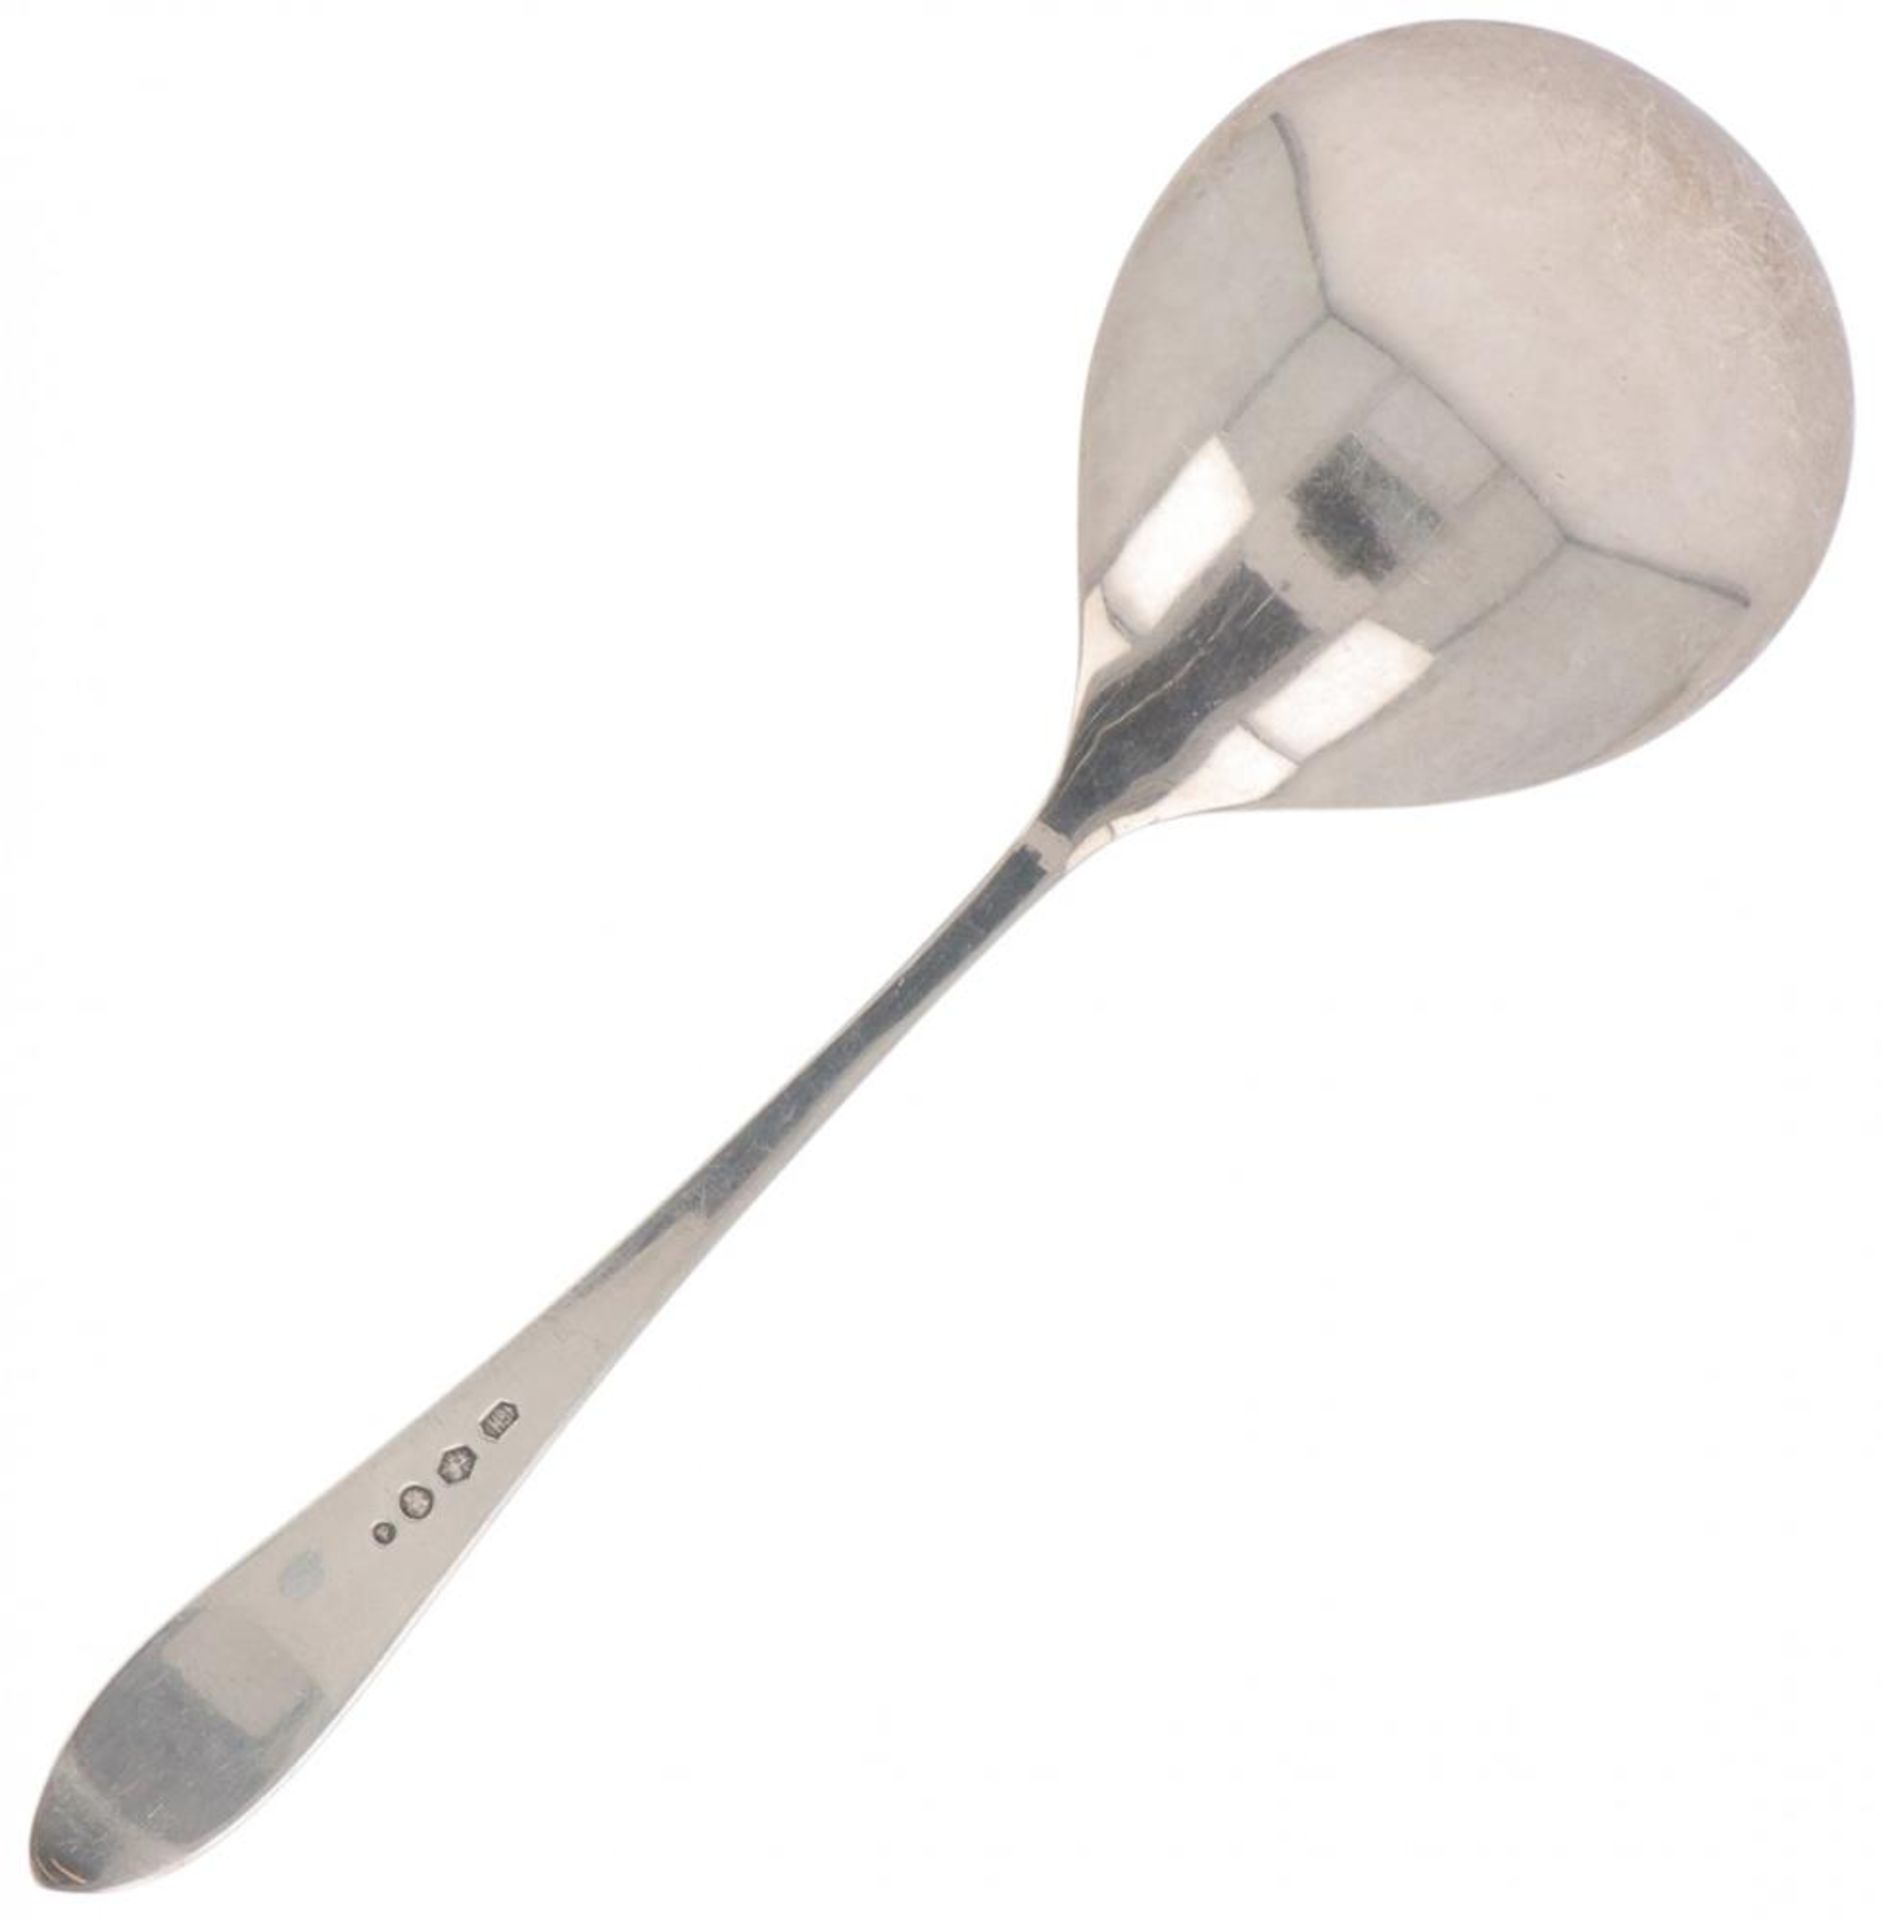 Rice spoon & Custard spoon "Dutch point fillet" silver. - Image 2 of 5